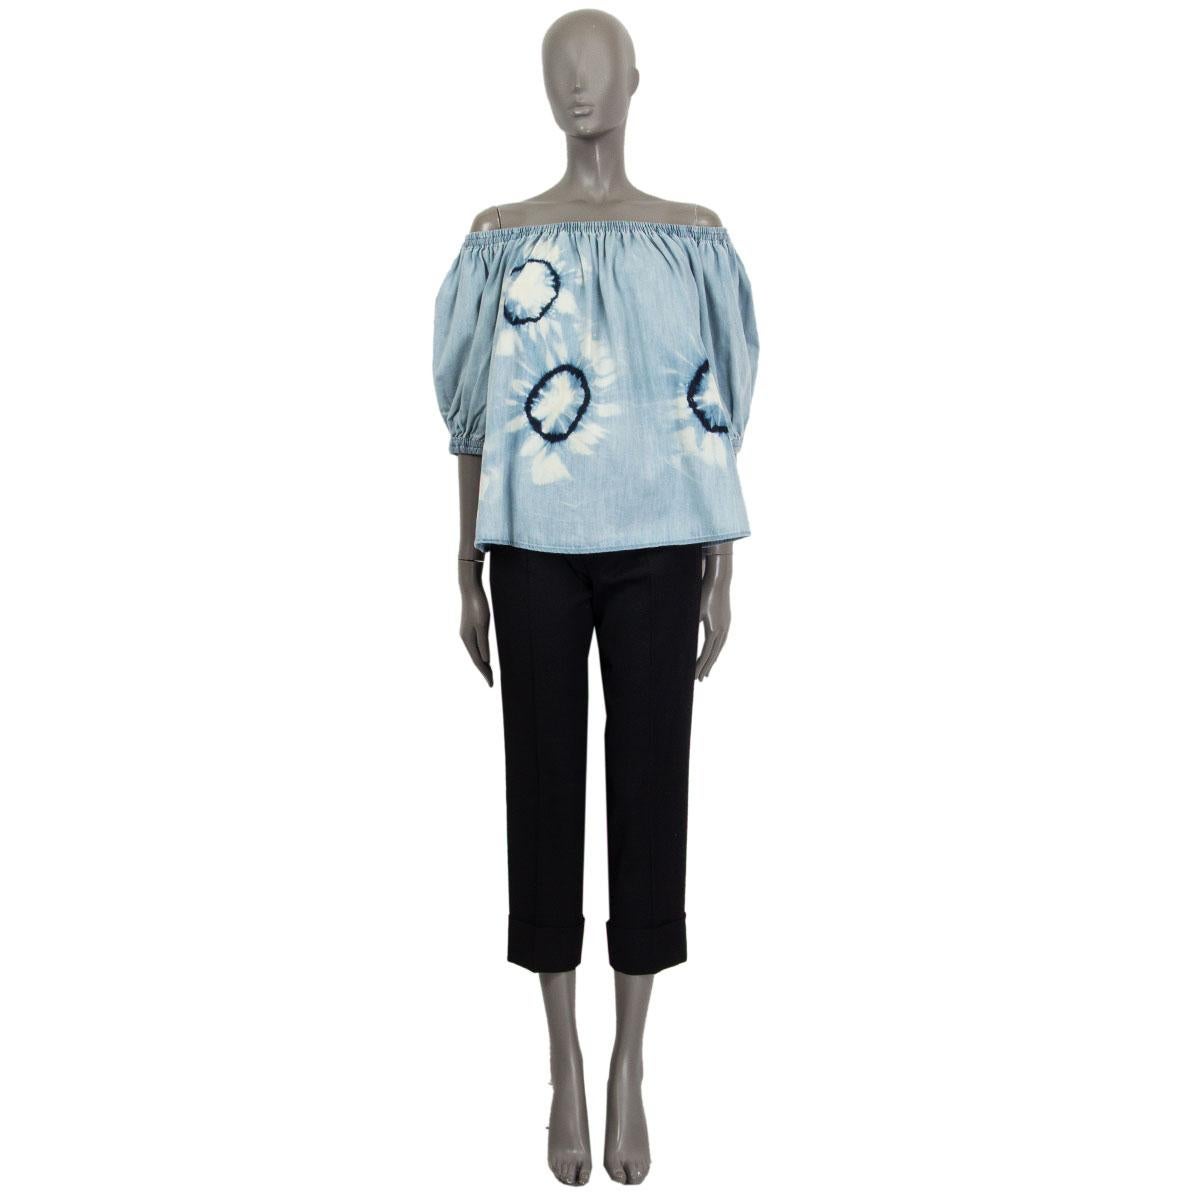 100% authentic Stella McCartney SS18 collection denim tie-dye blouse in light blue, off-white and dark blue cotton (98%) and elastane (2%). Features an off the shoulder design, three-quarter length sleeves, elasticated cuffs, an elasticated hem and